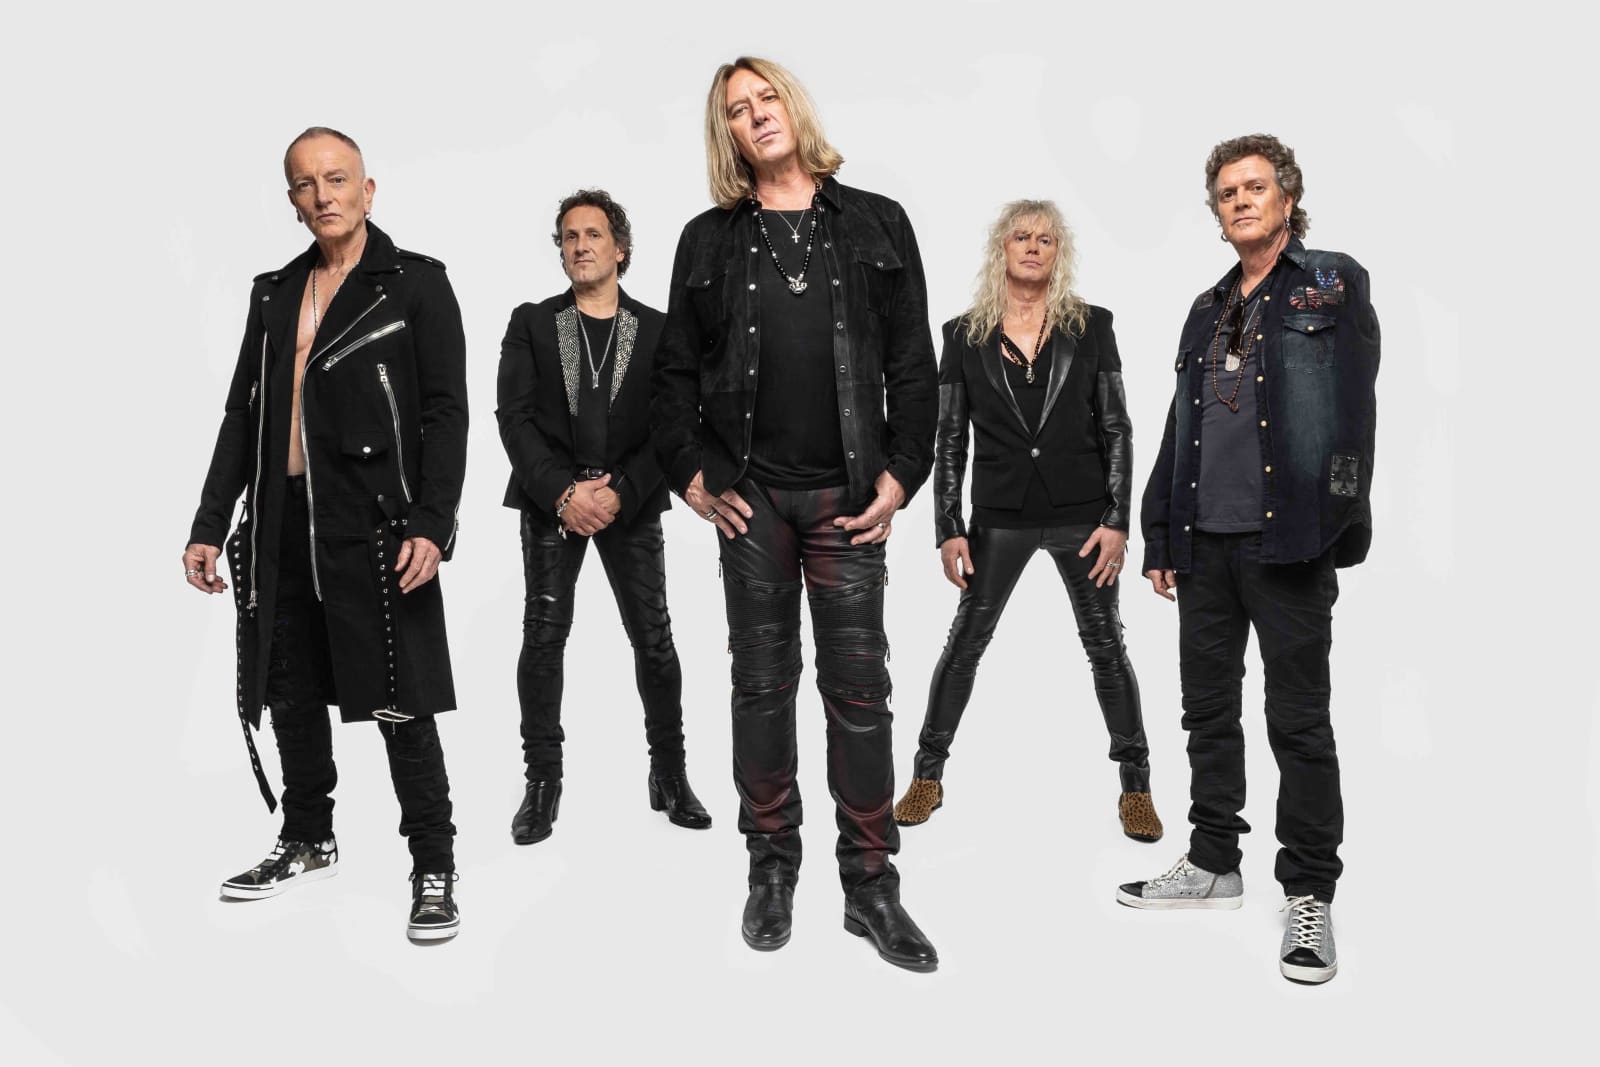 Def Leppard - Journey at Minute Maid Park Tickets